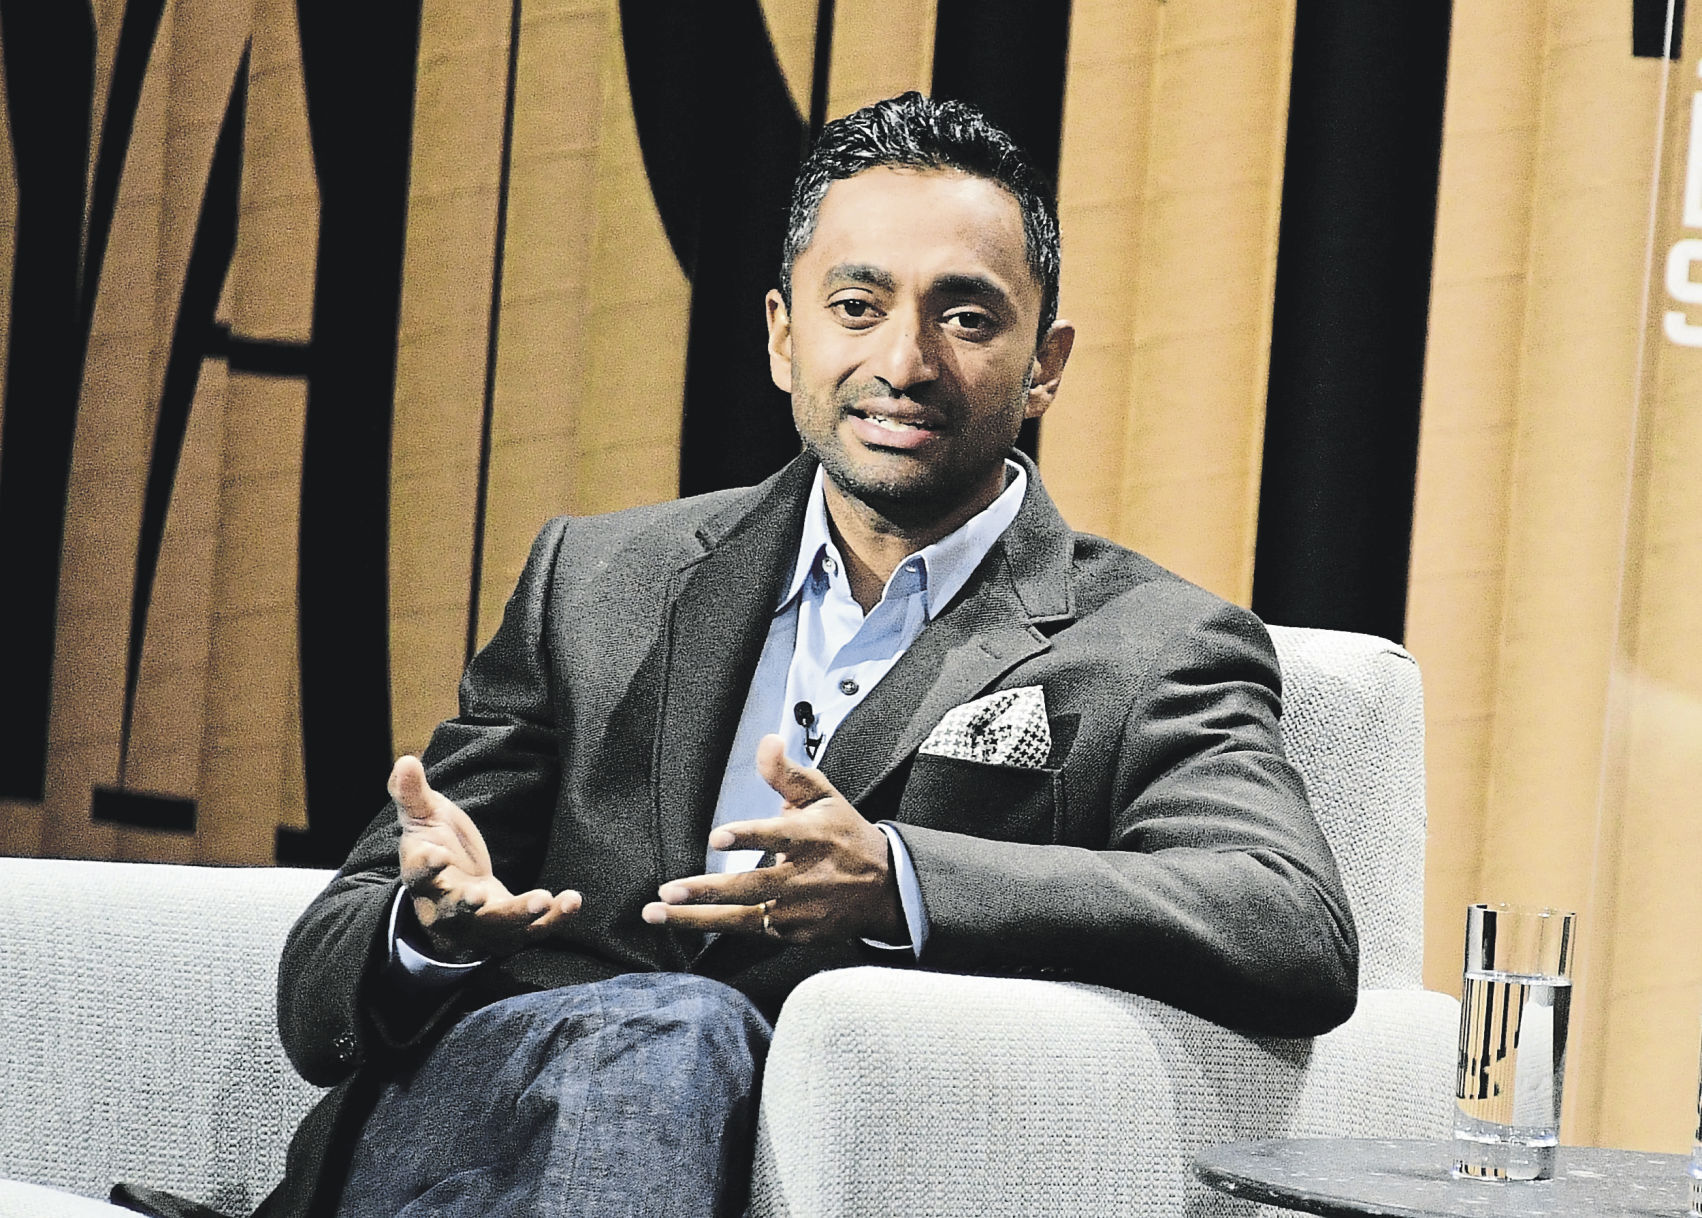 Founder/CEO of Social Capital, Chamath Palihapitiya. PHOTO CREDIT: Photo by Mike Windle/Getty Image